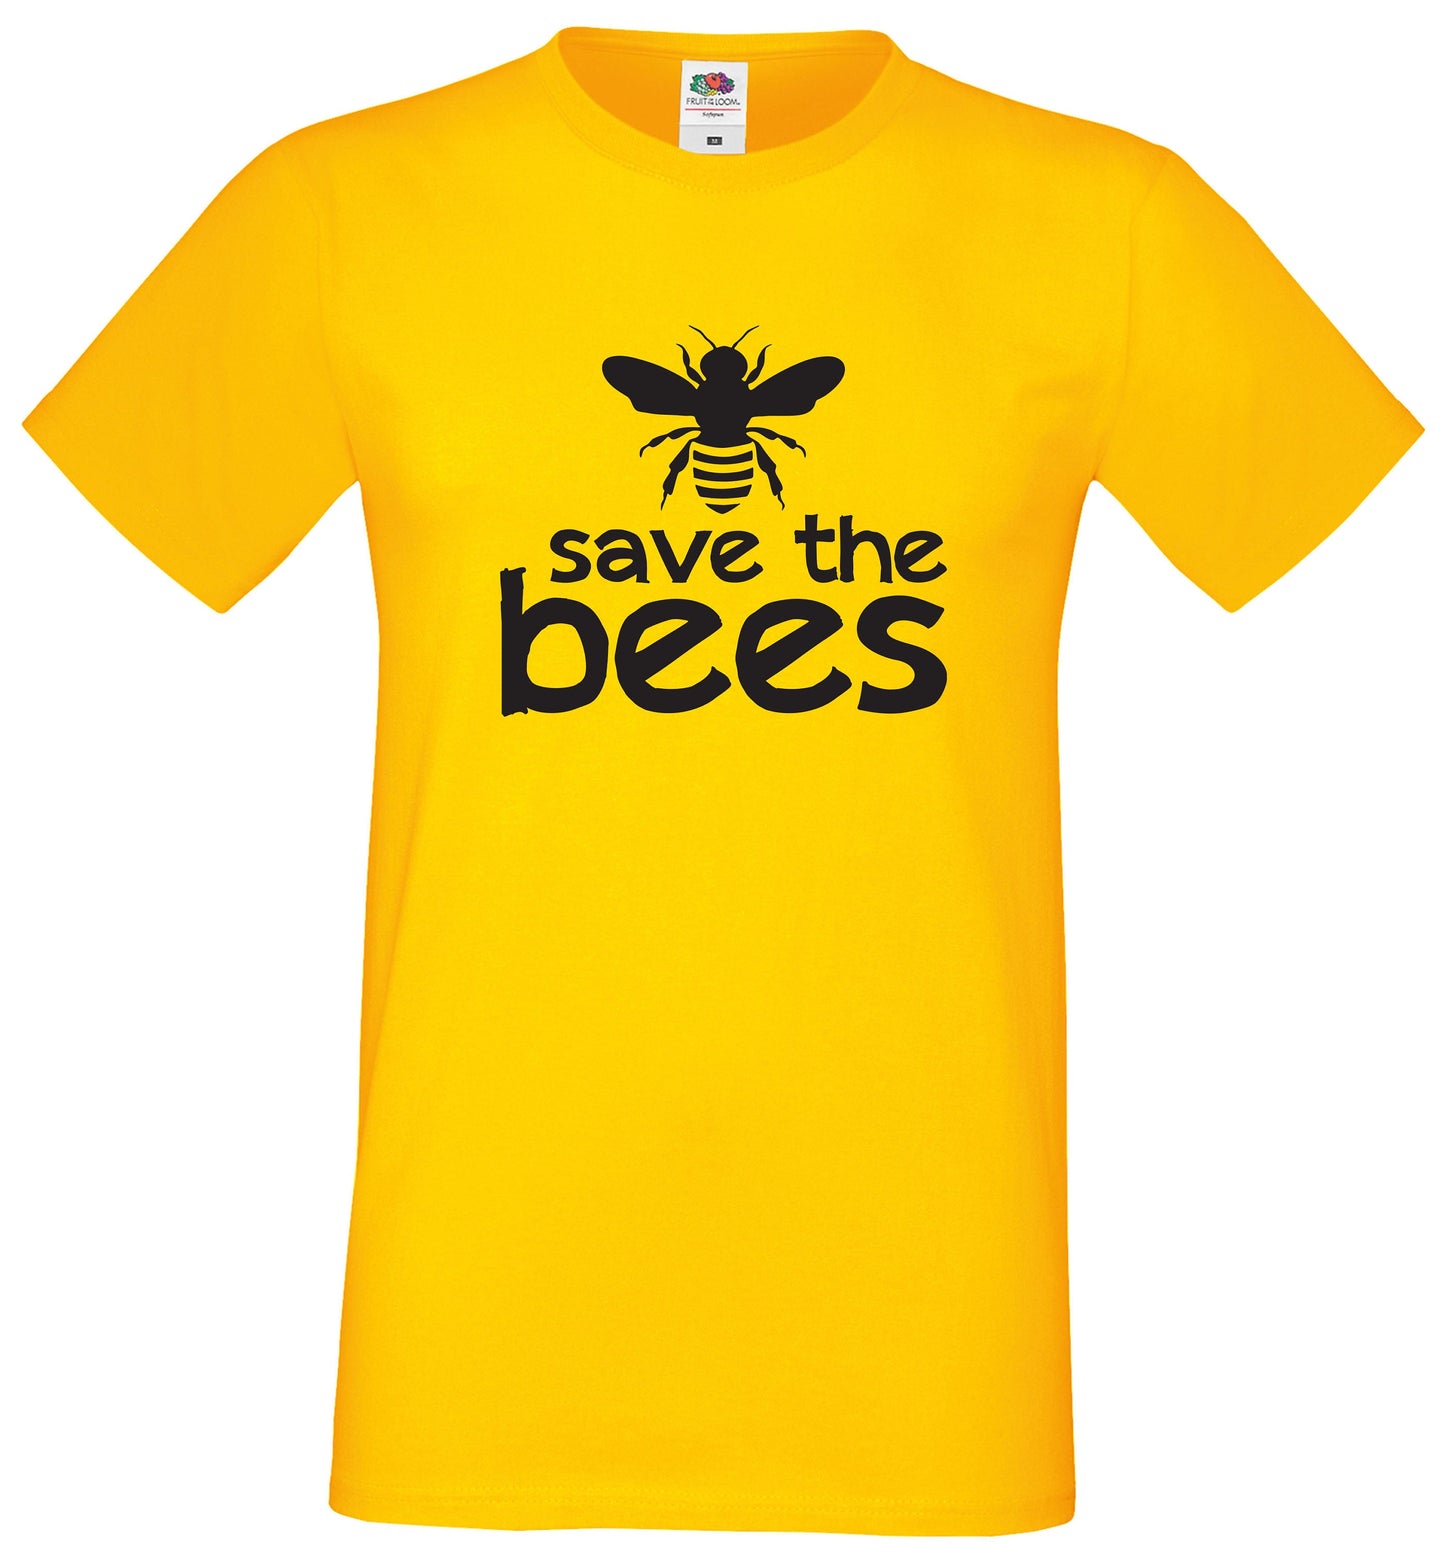 Save The Bees T-Shirt, Yellow Ladies Mens, Conservation, Nature, Environment